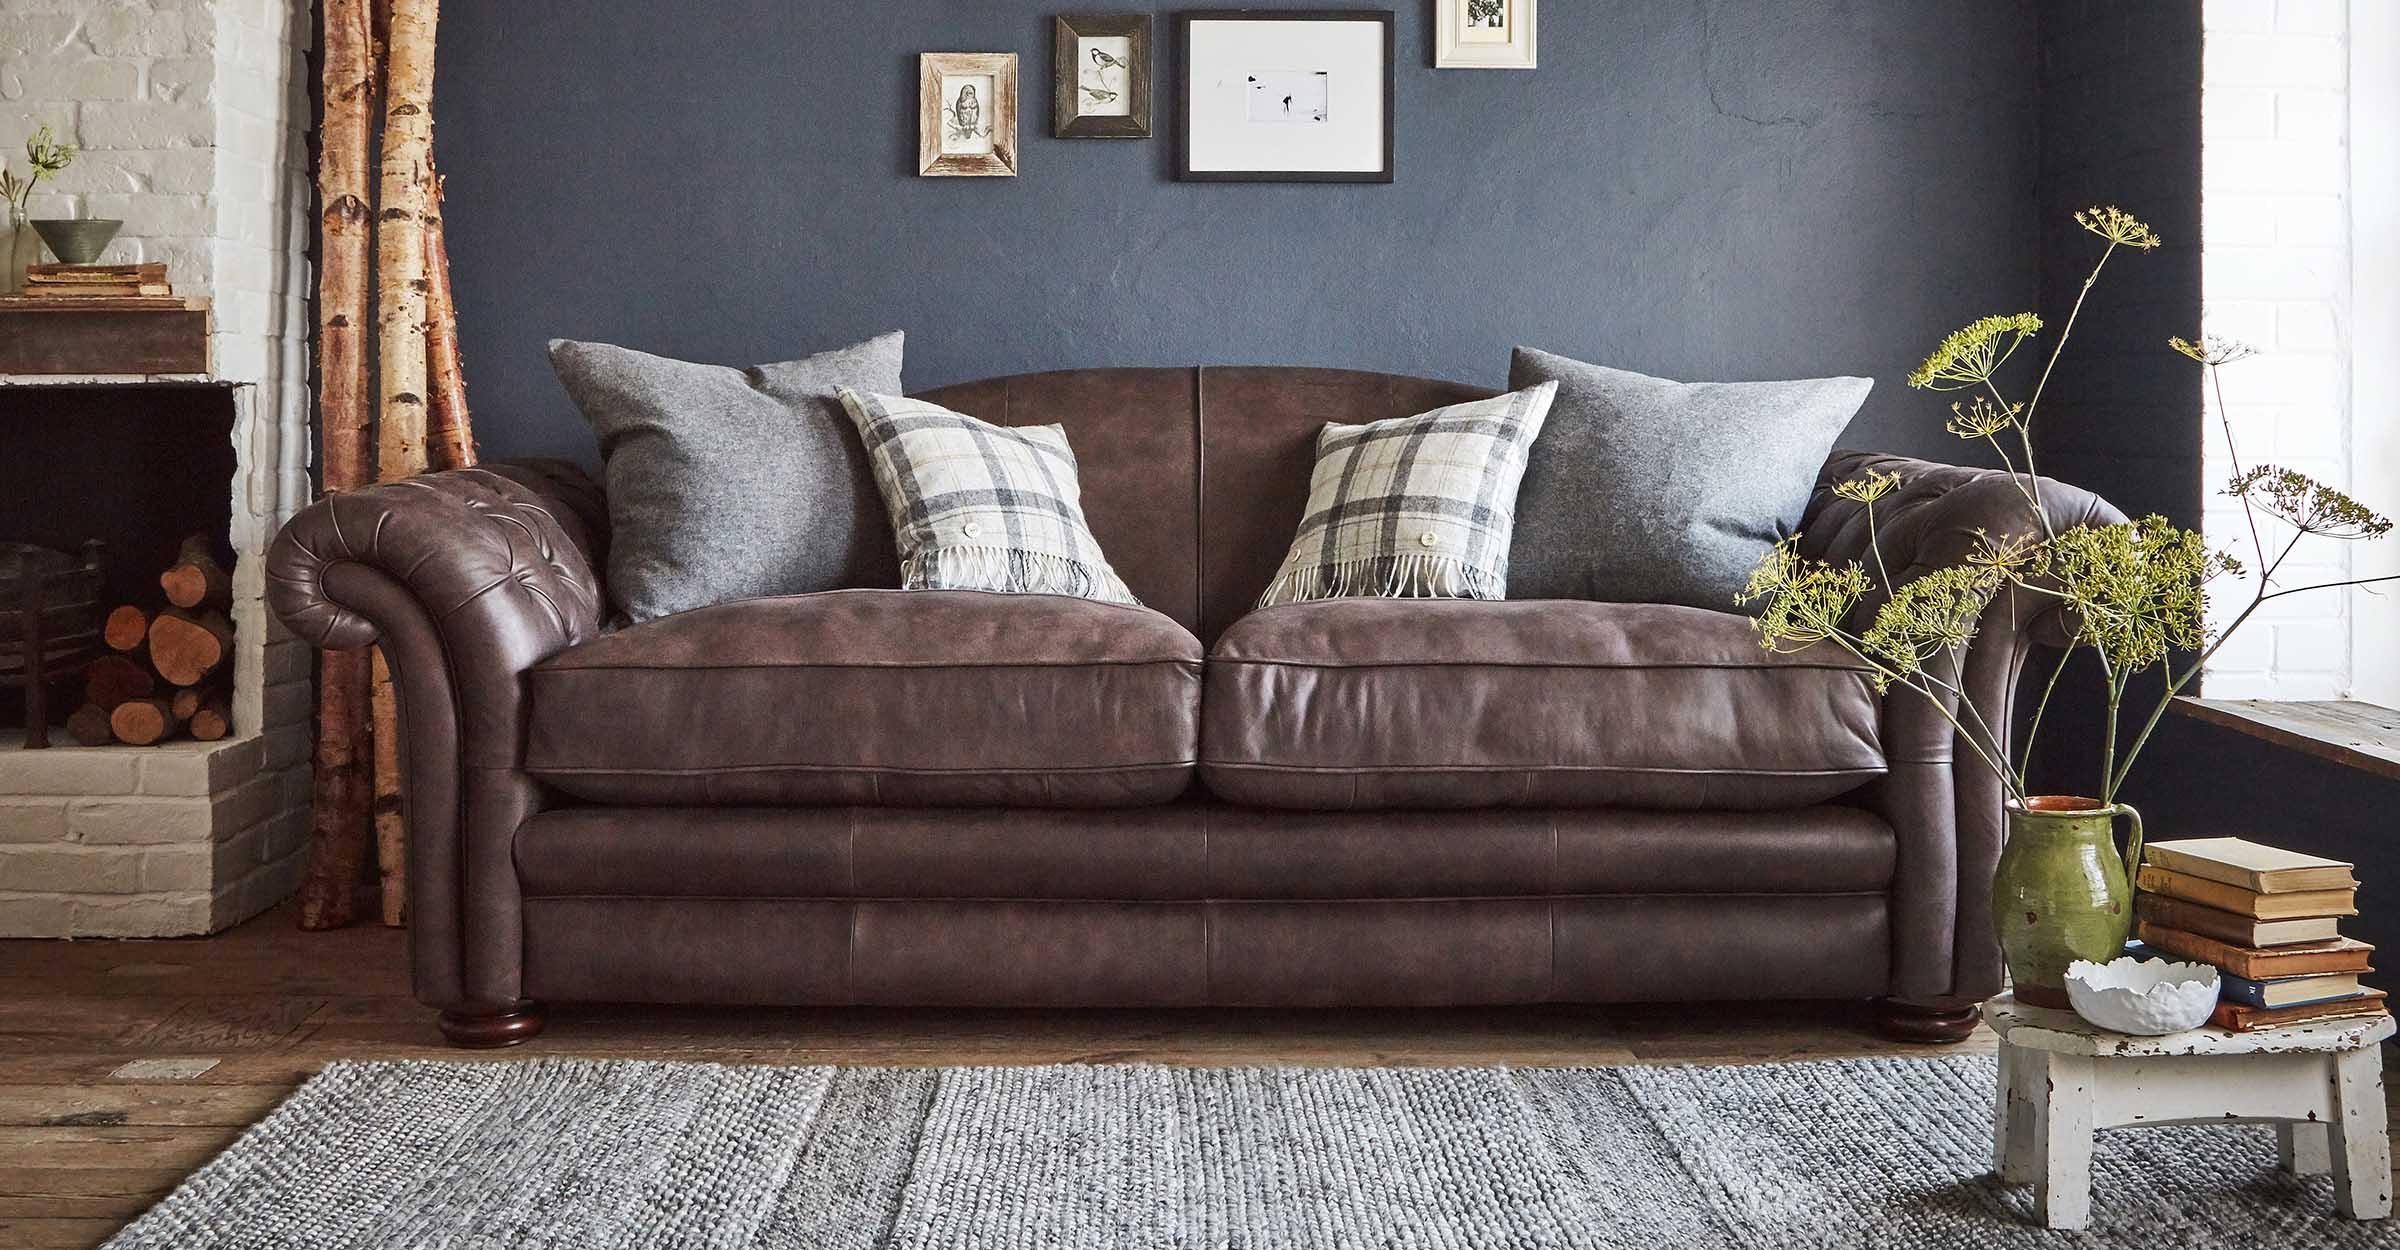 Brown Sofas Dfs, How To Change Leather Sofa Cushions